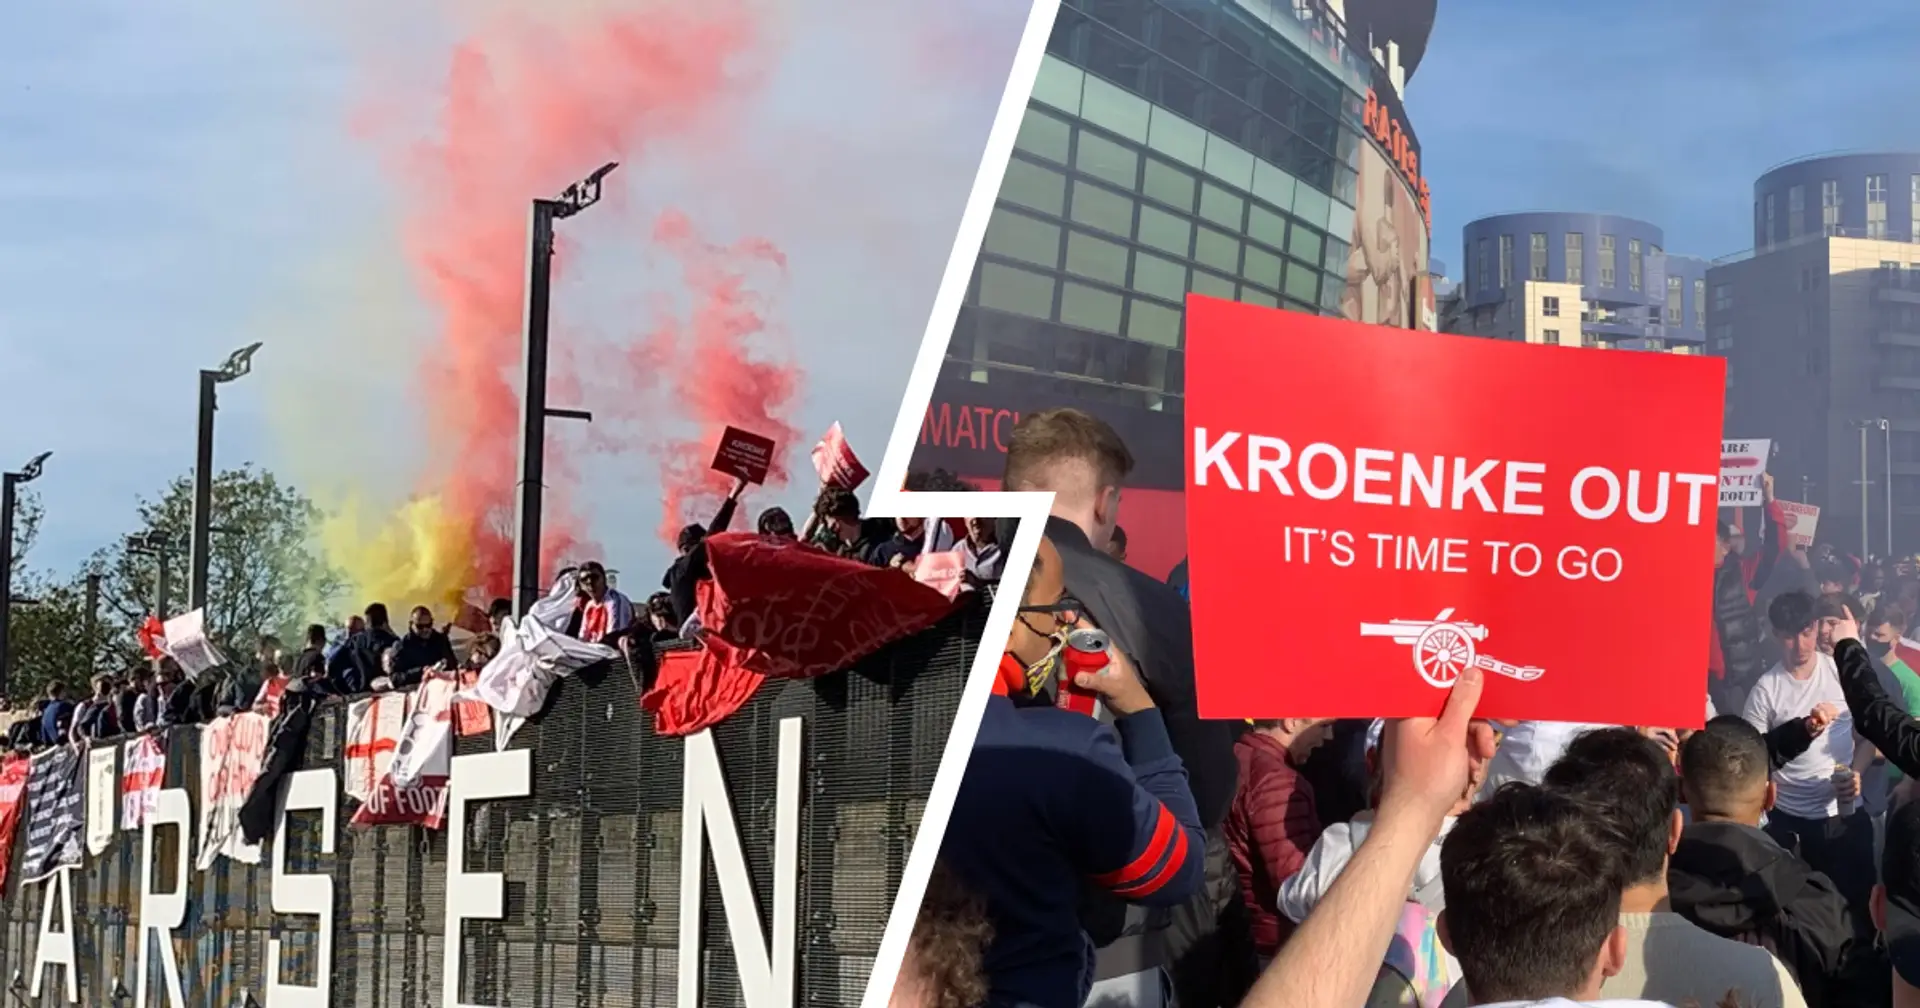 Anti-Kroenke protest gains pace as Arsenal fans make strong statement